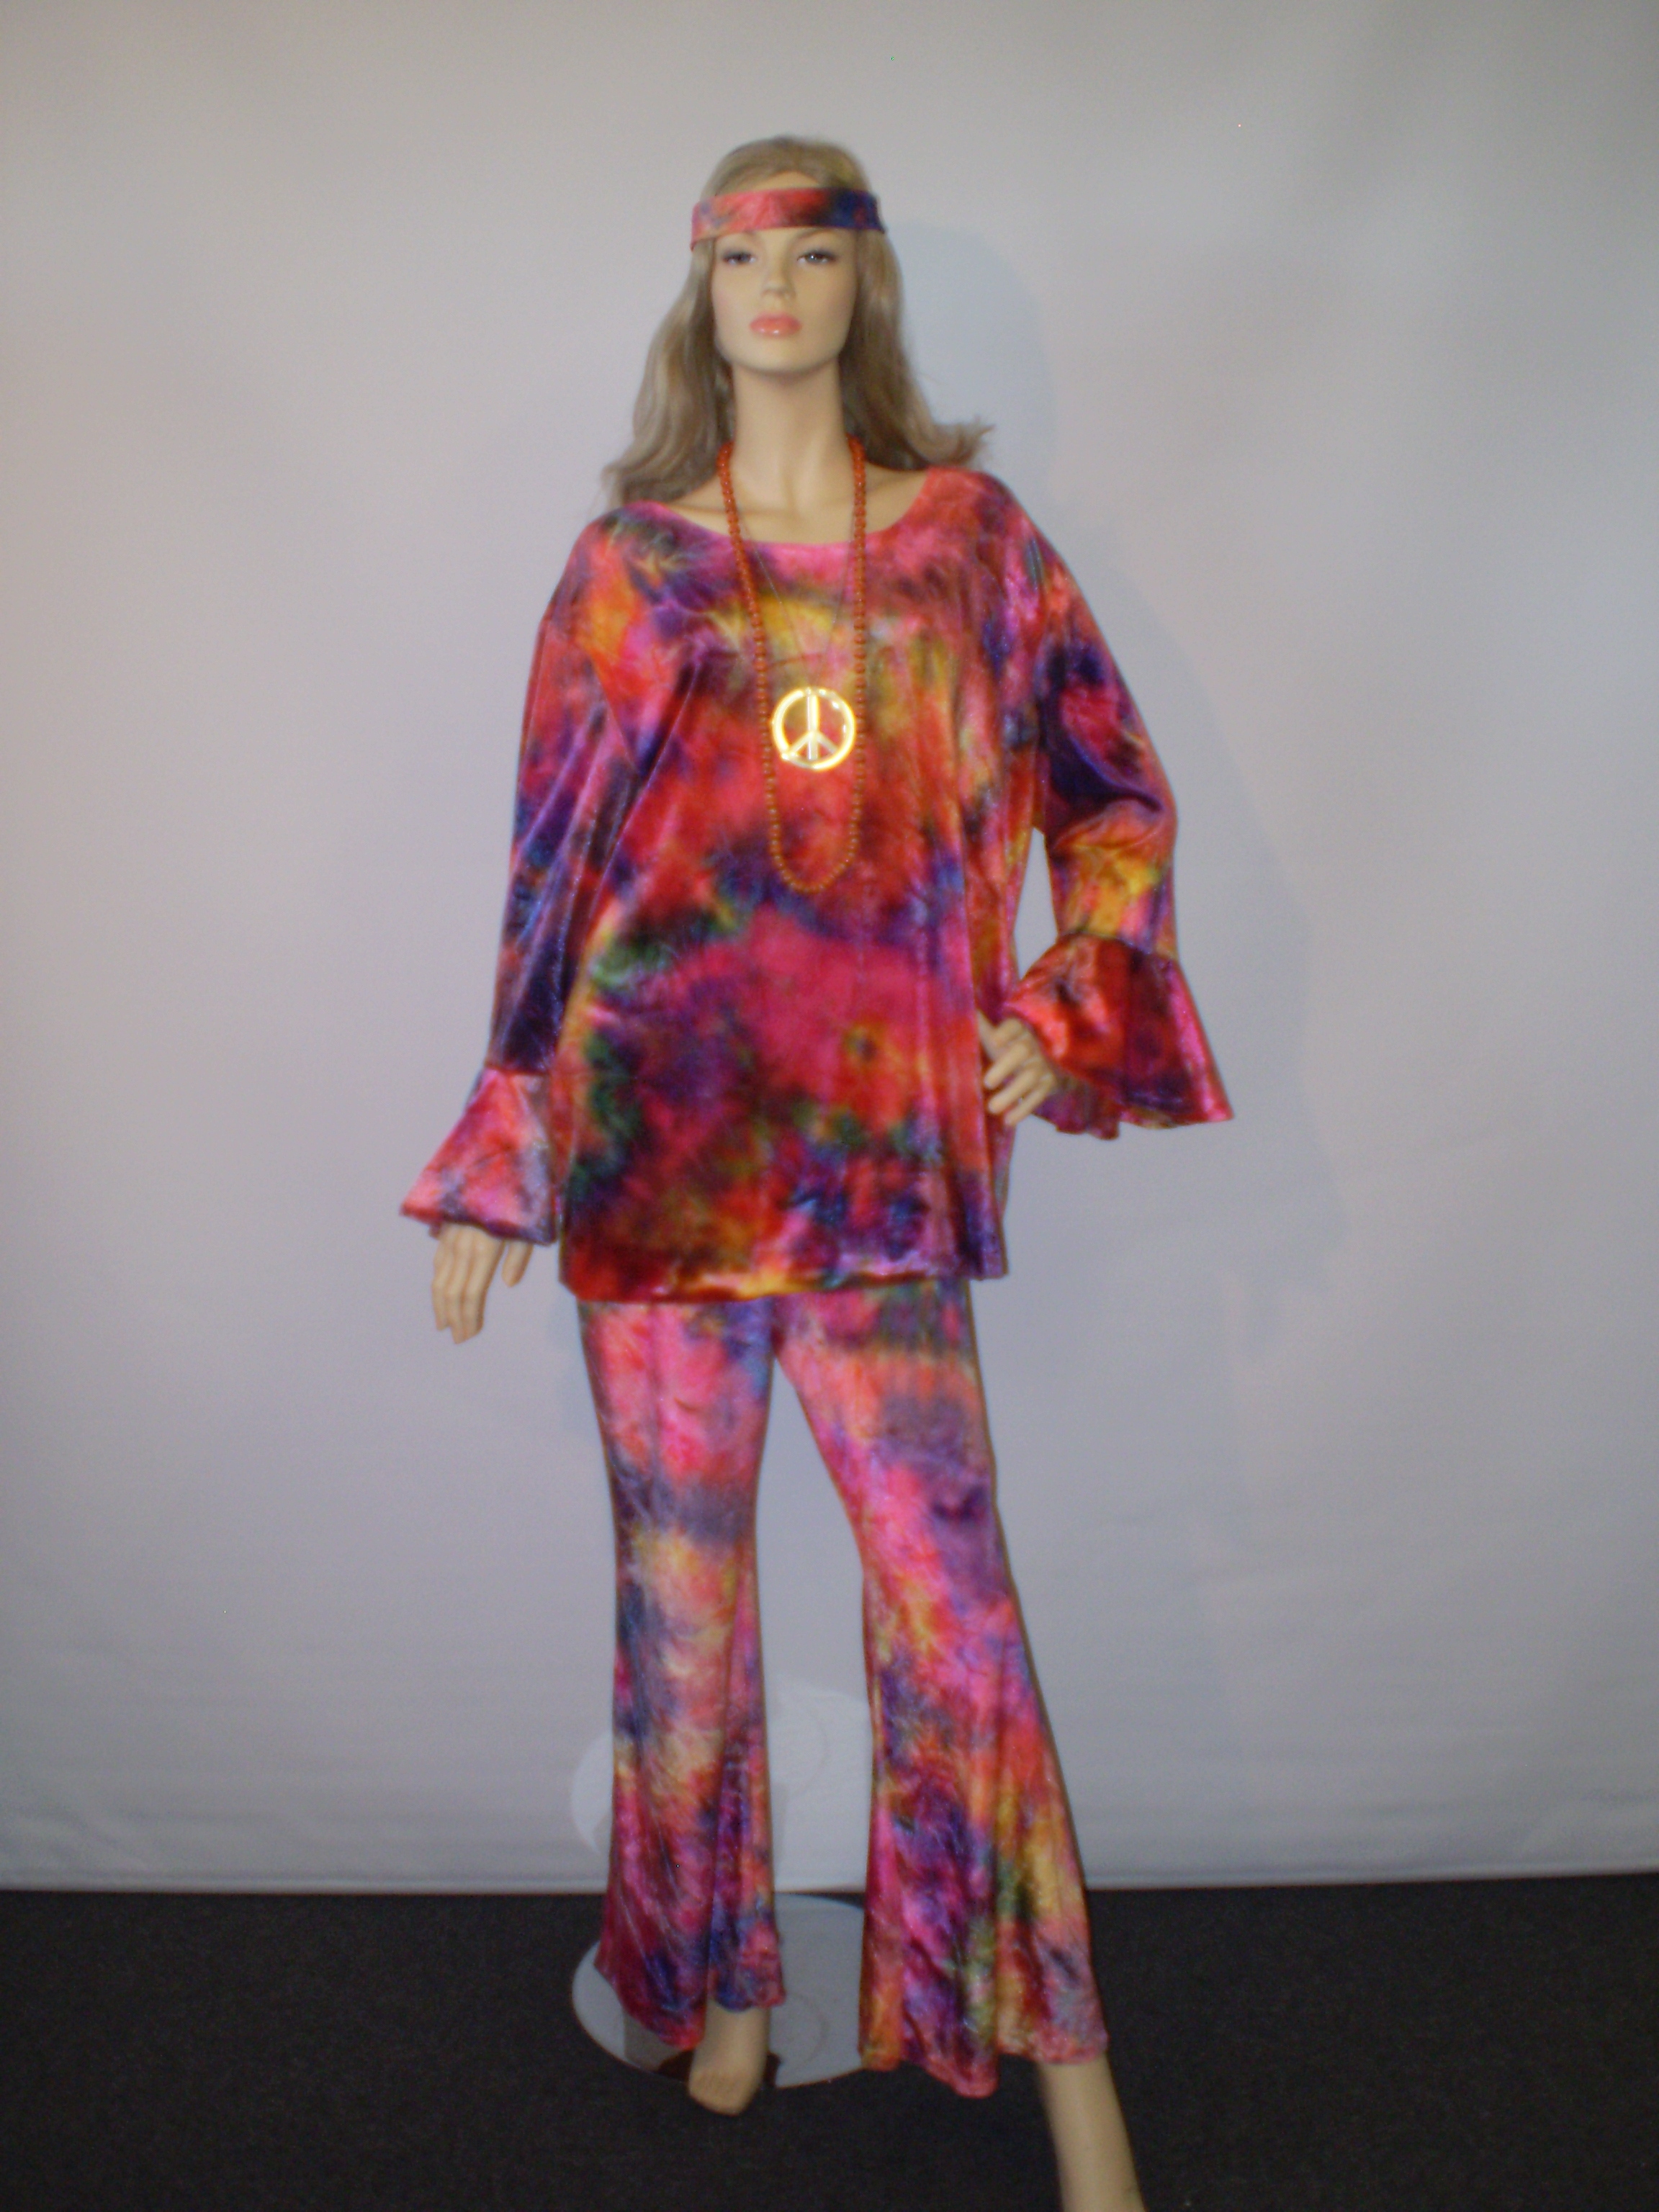 60s 70s costumes, disco to hippies for men and women in all sizes